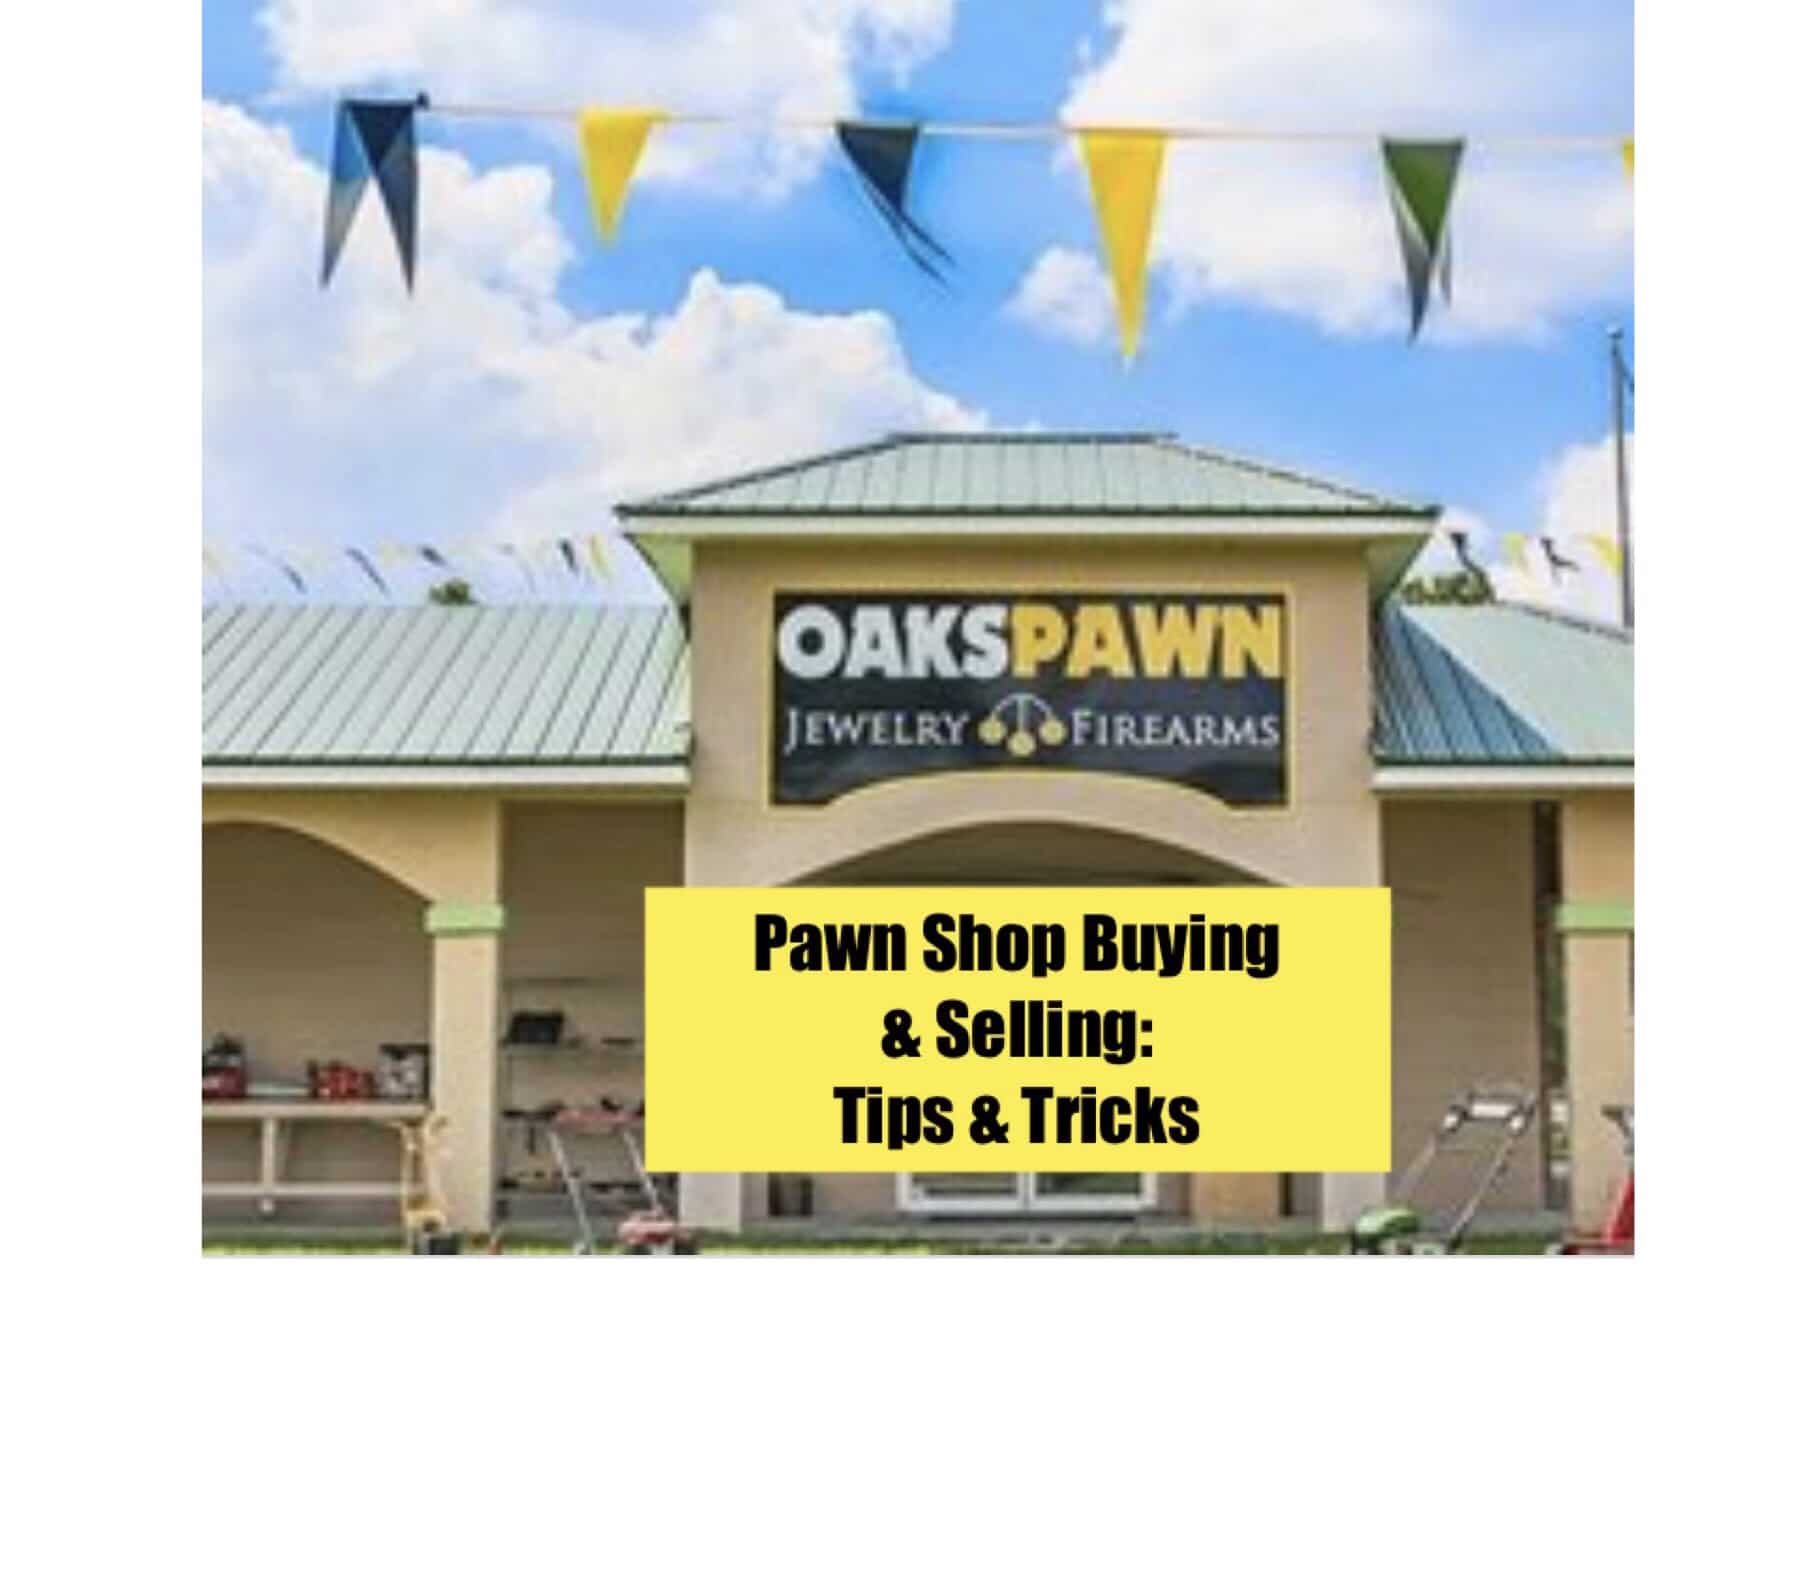 Tips for Buying and Selling at a Pawn Shop